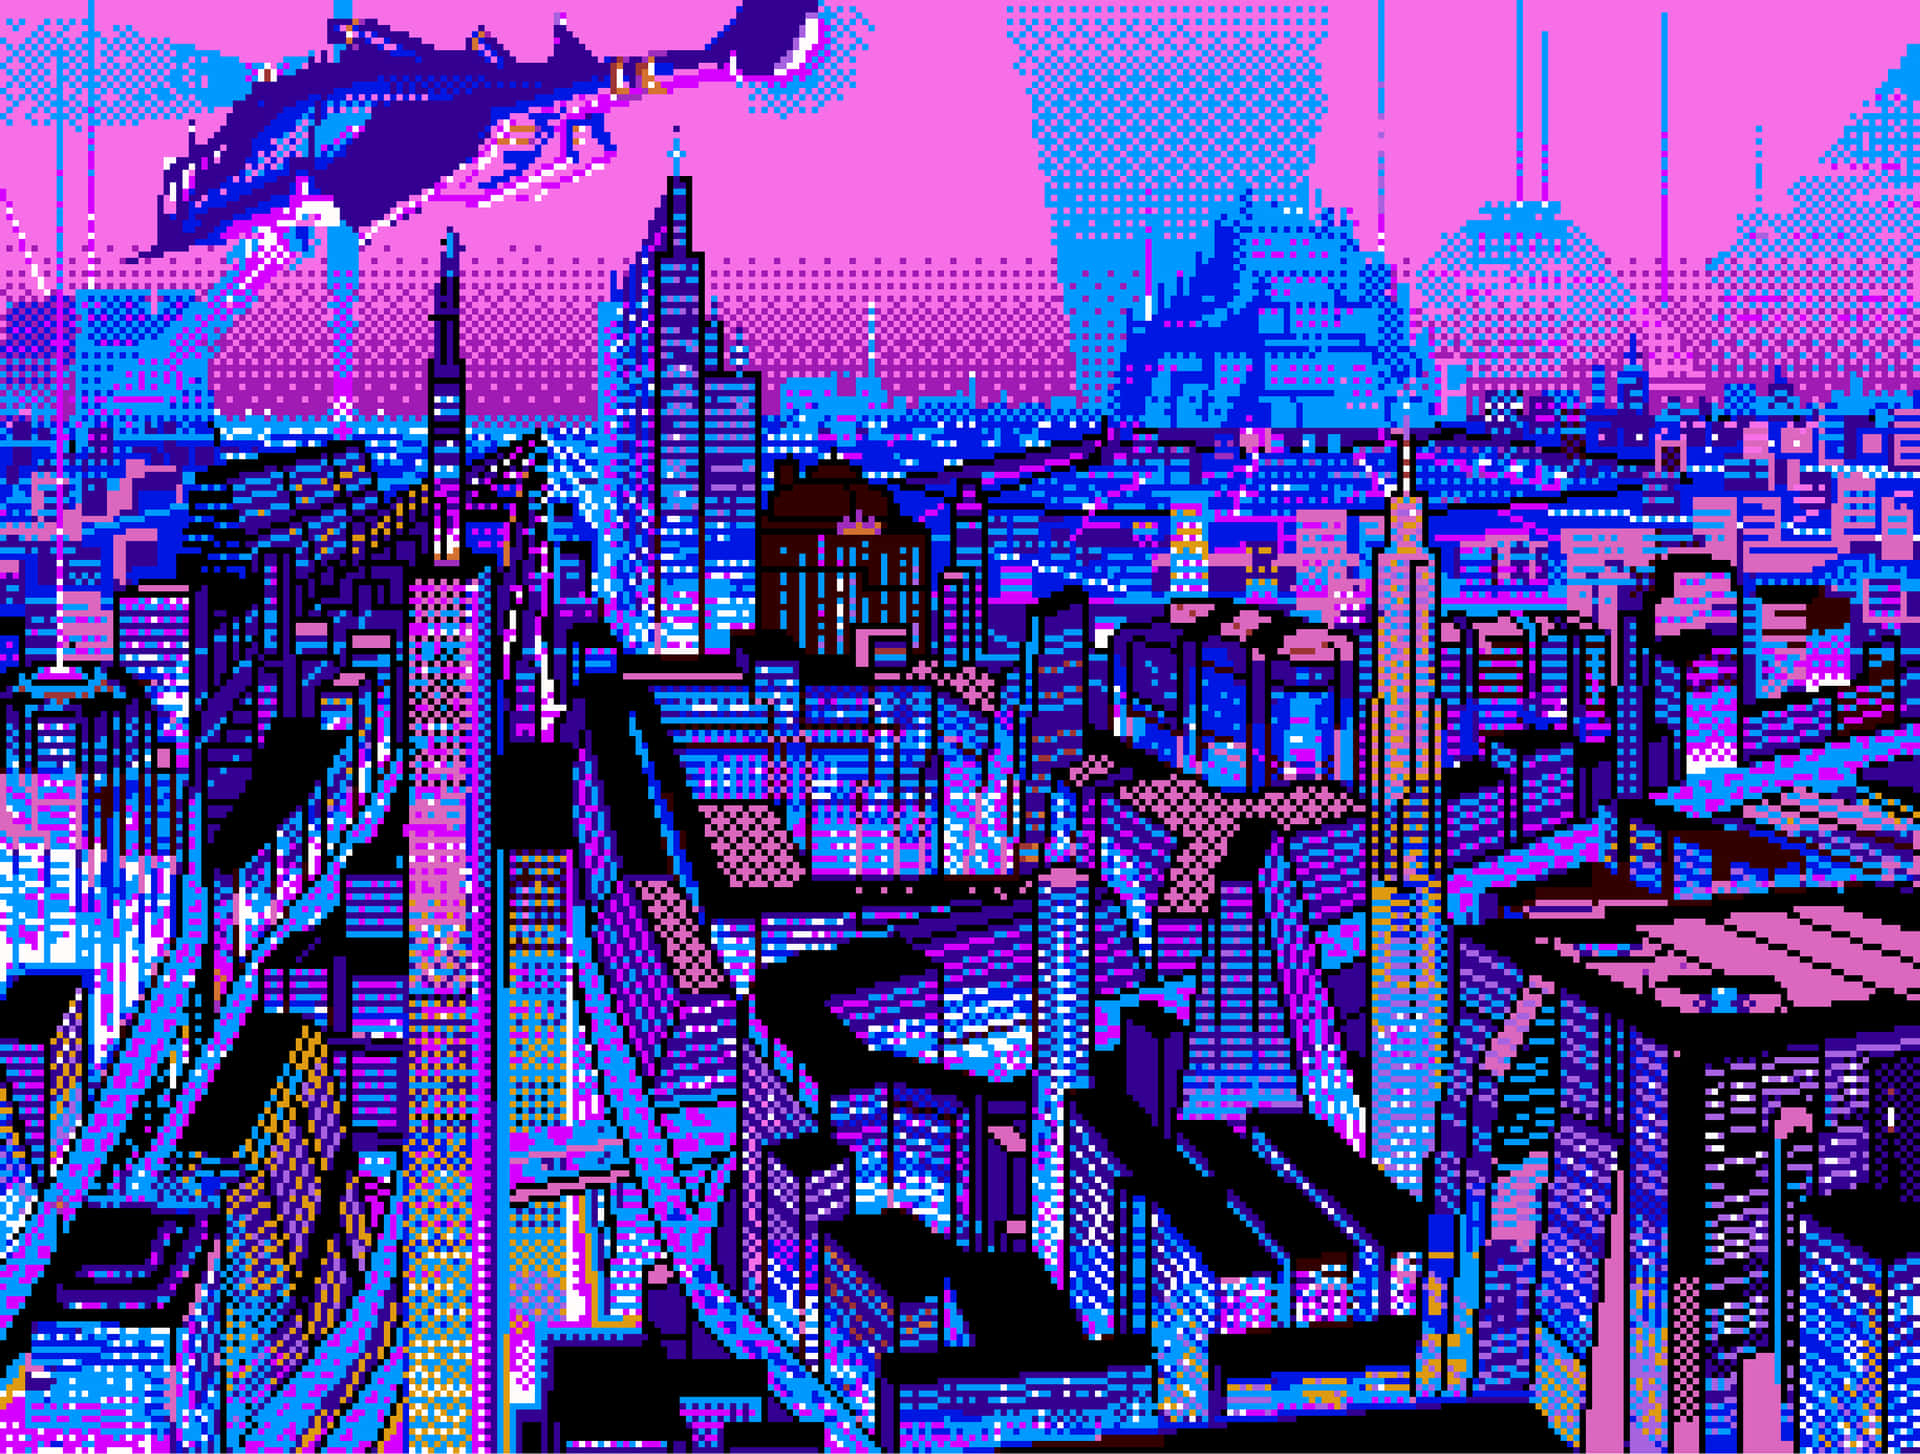 Get Ready To Be Immersed Into The Cyberpunk Pixel Art! Background